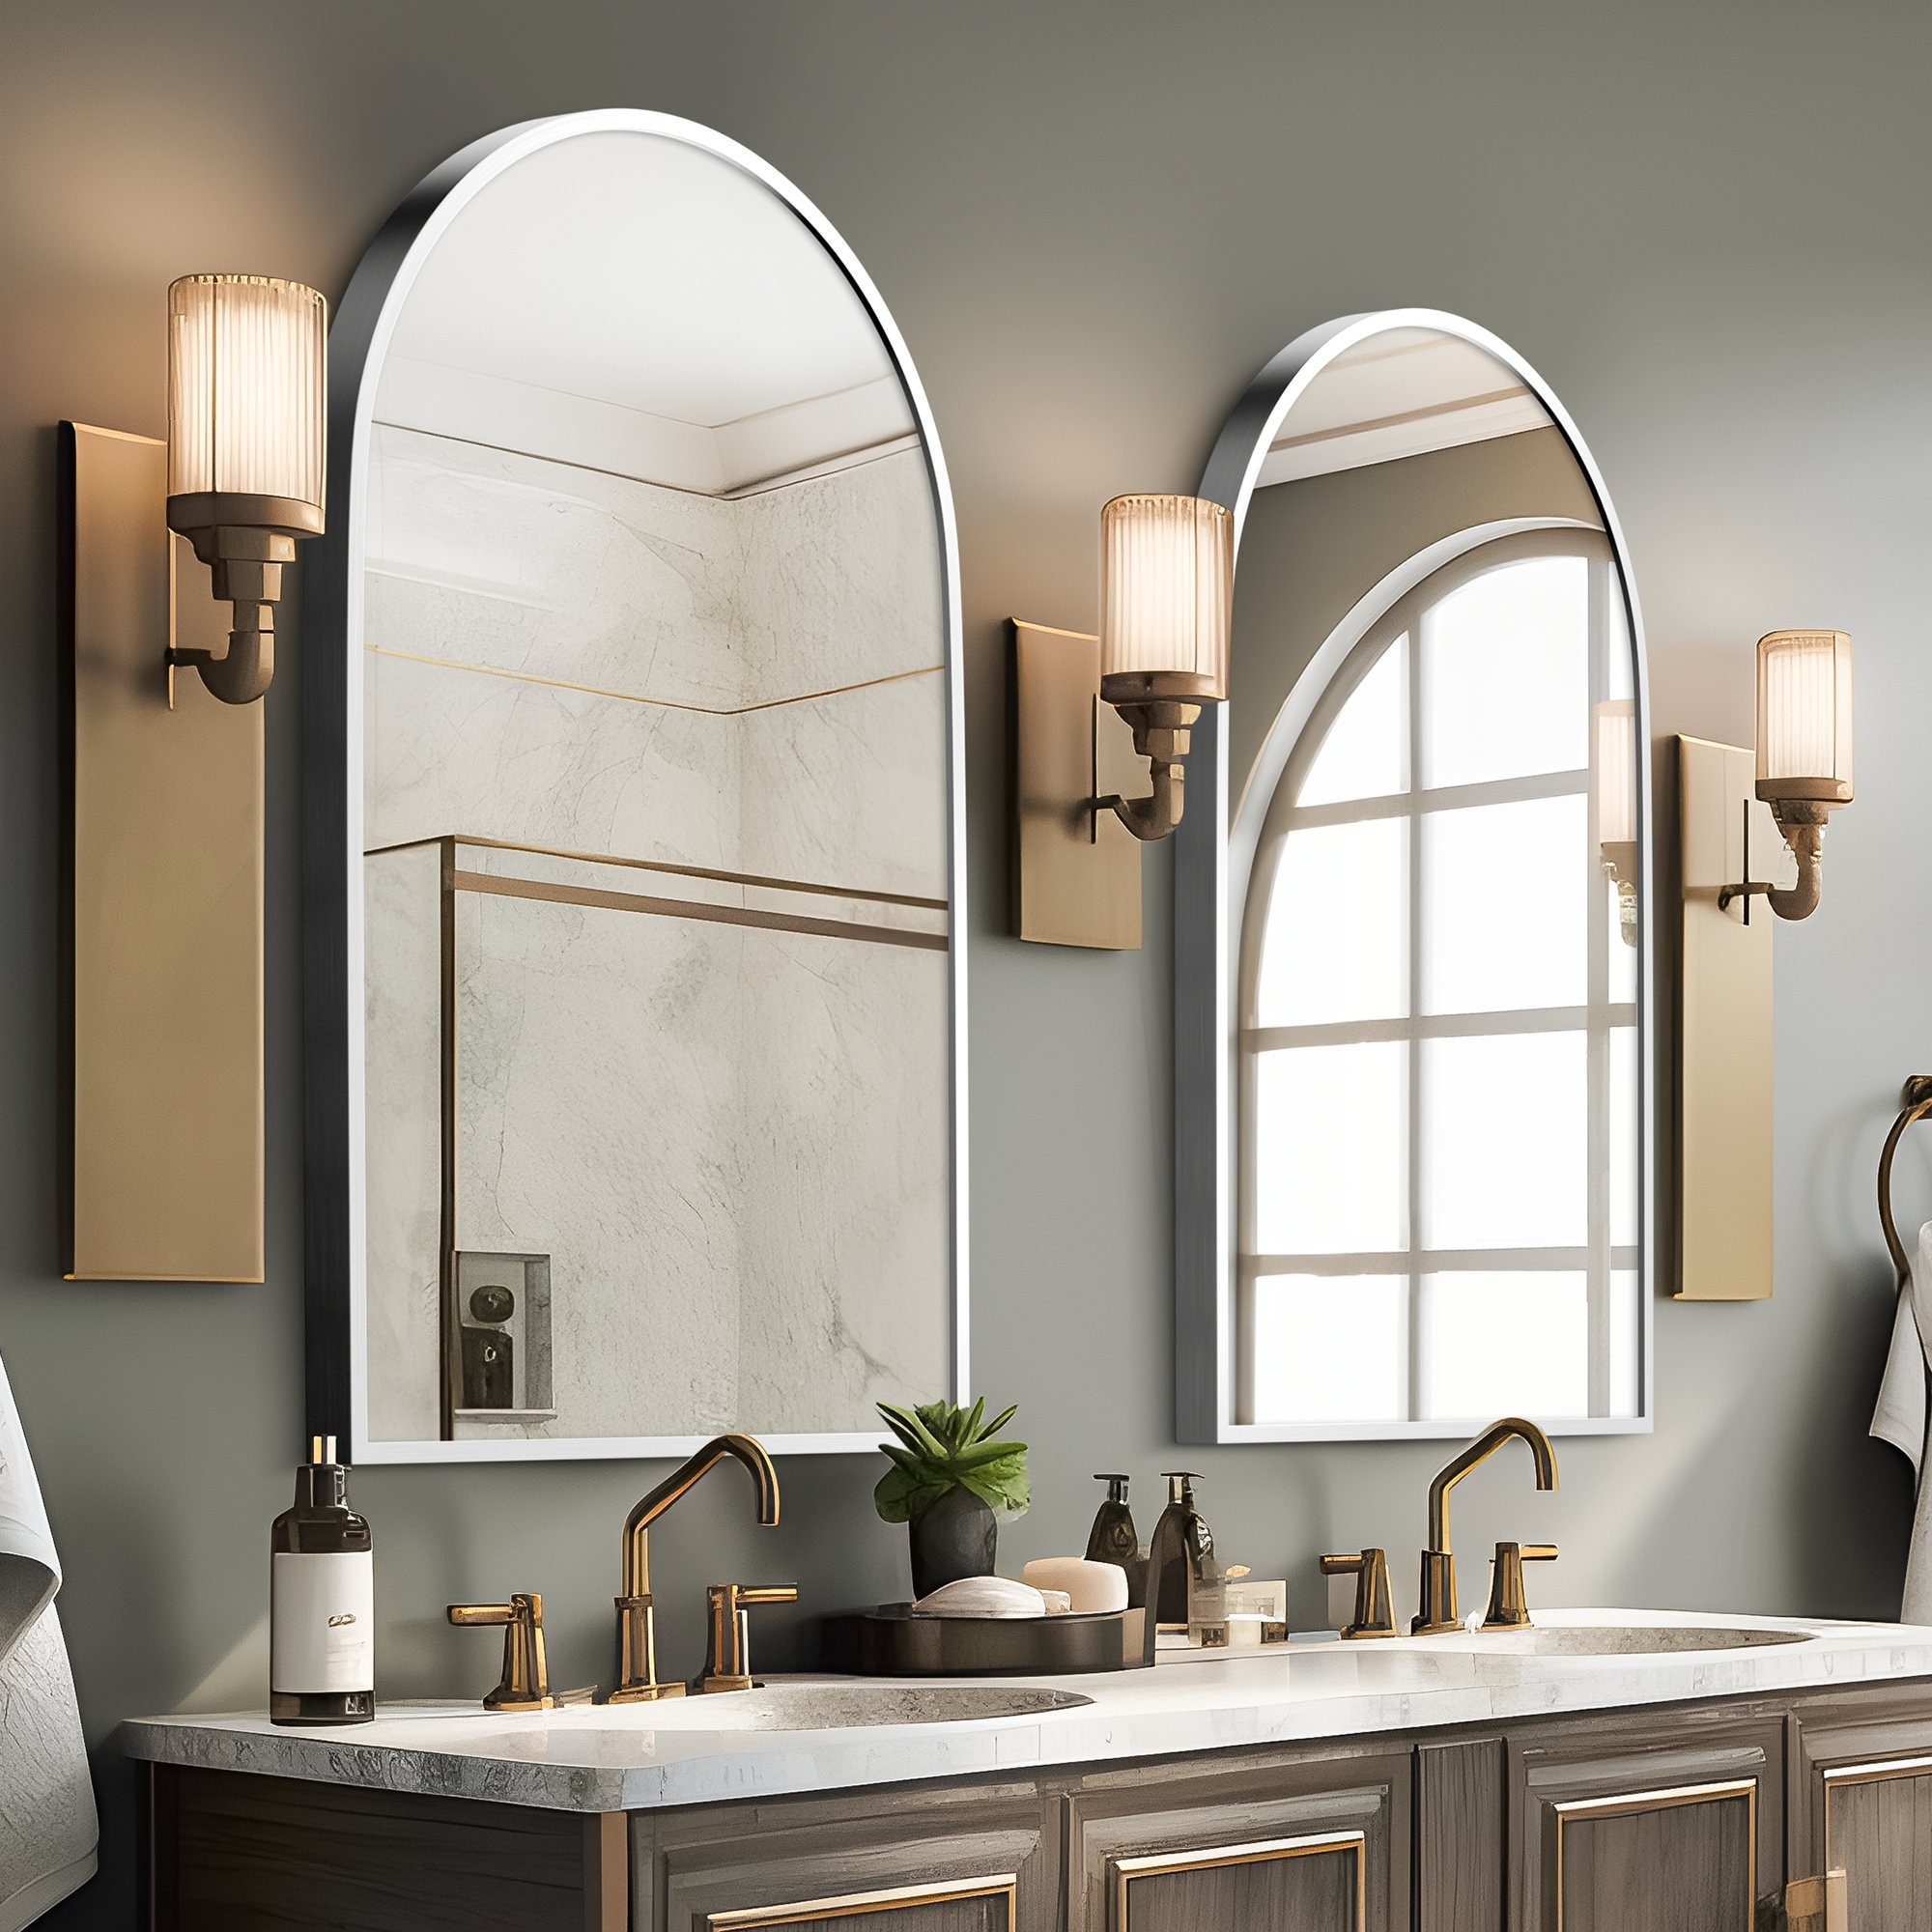 A pair of arched mirrors over a double-sink vanity